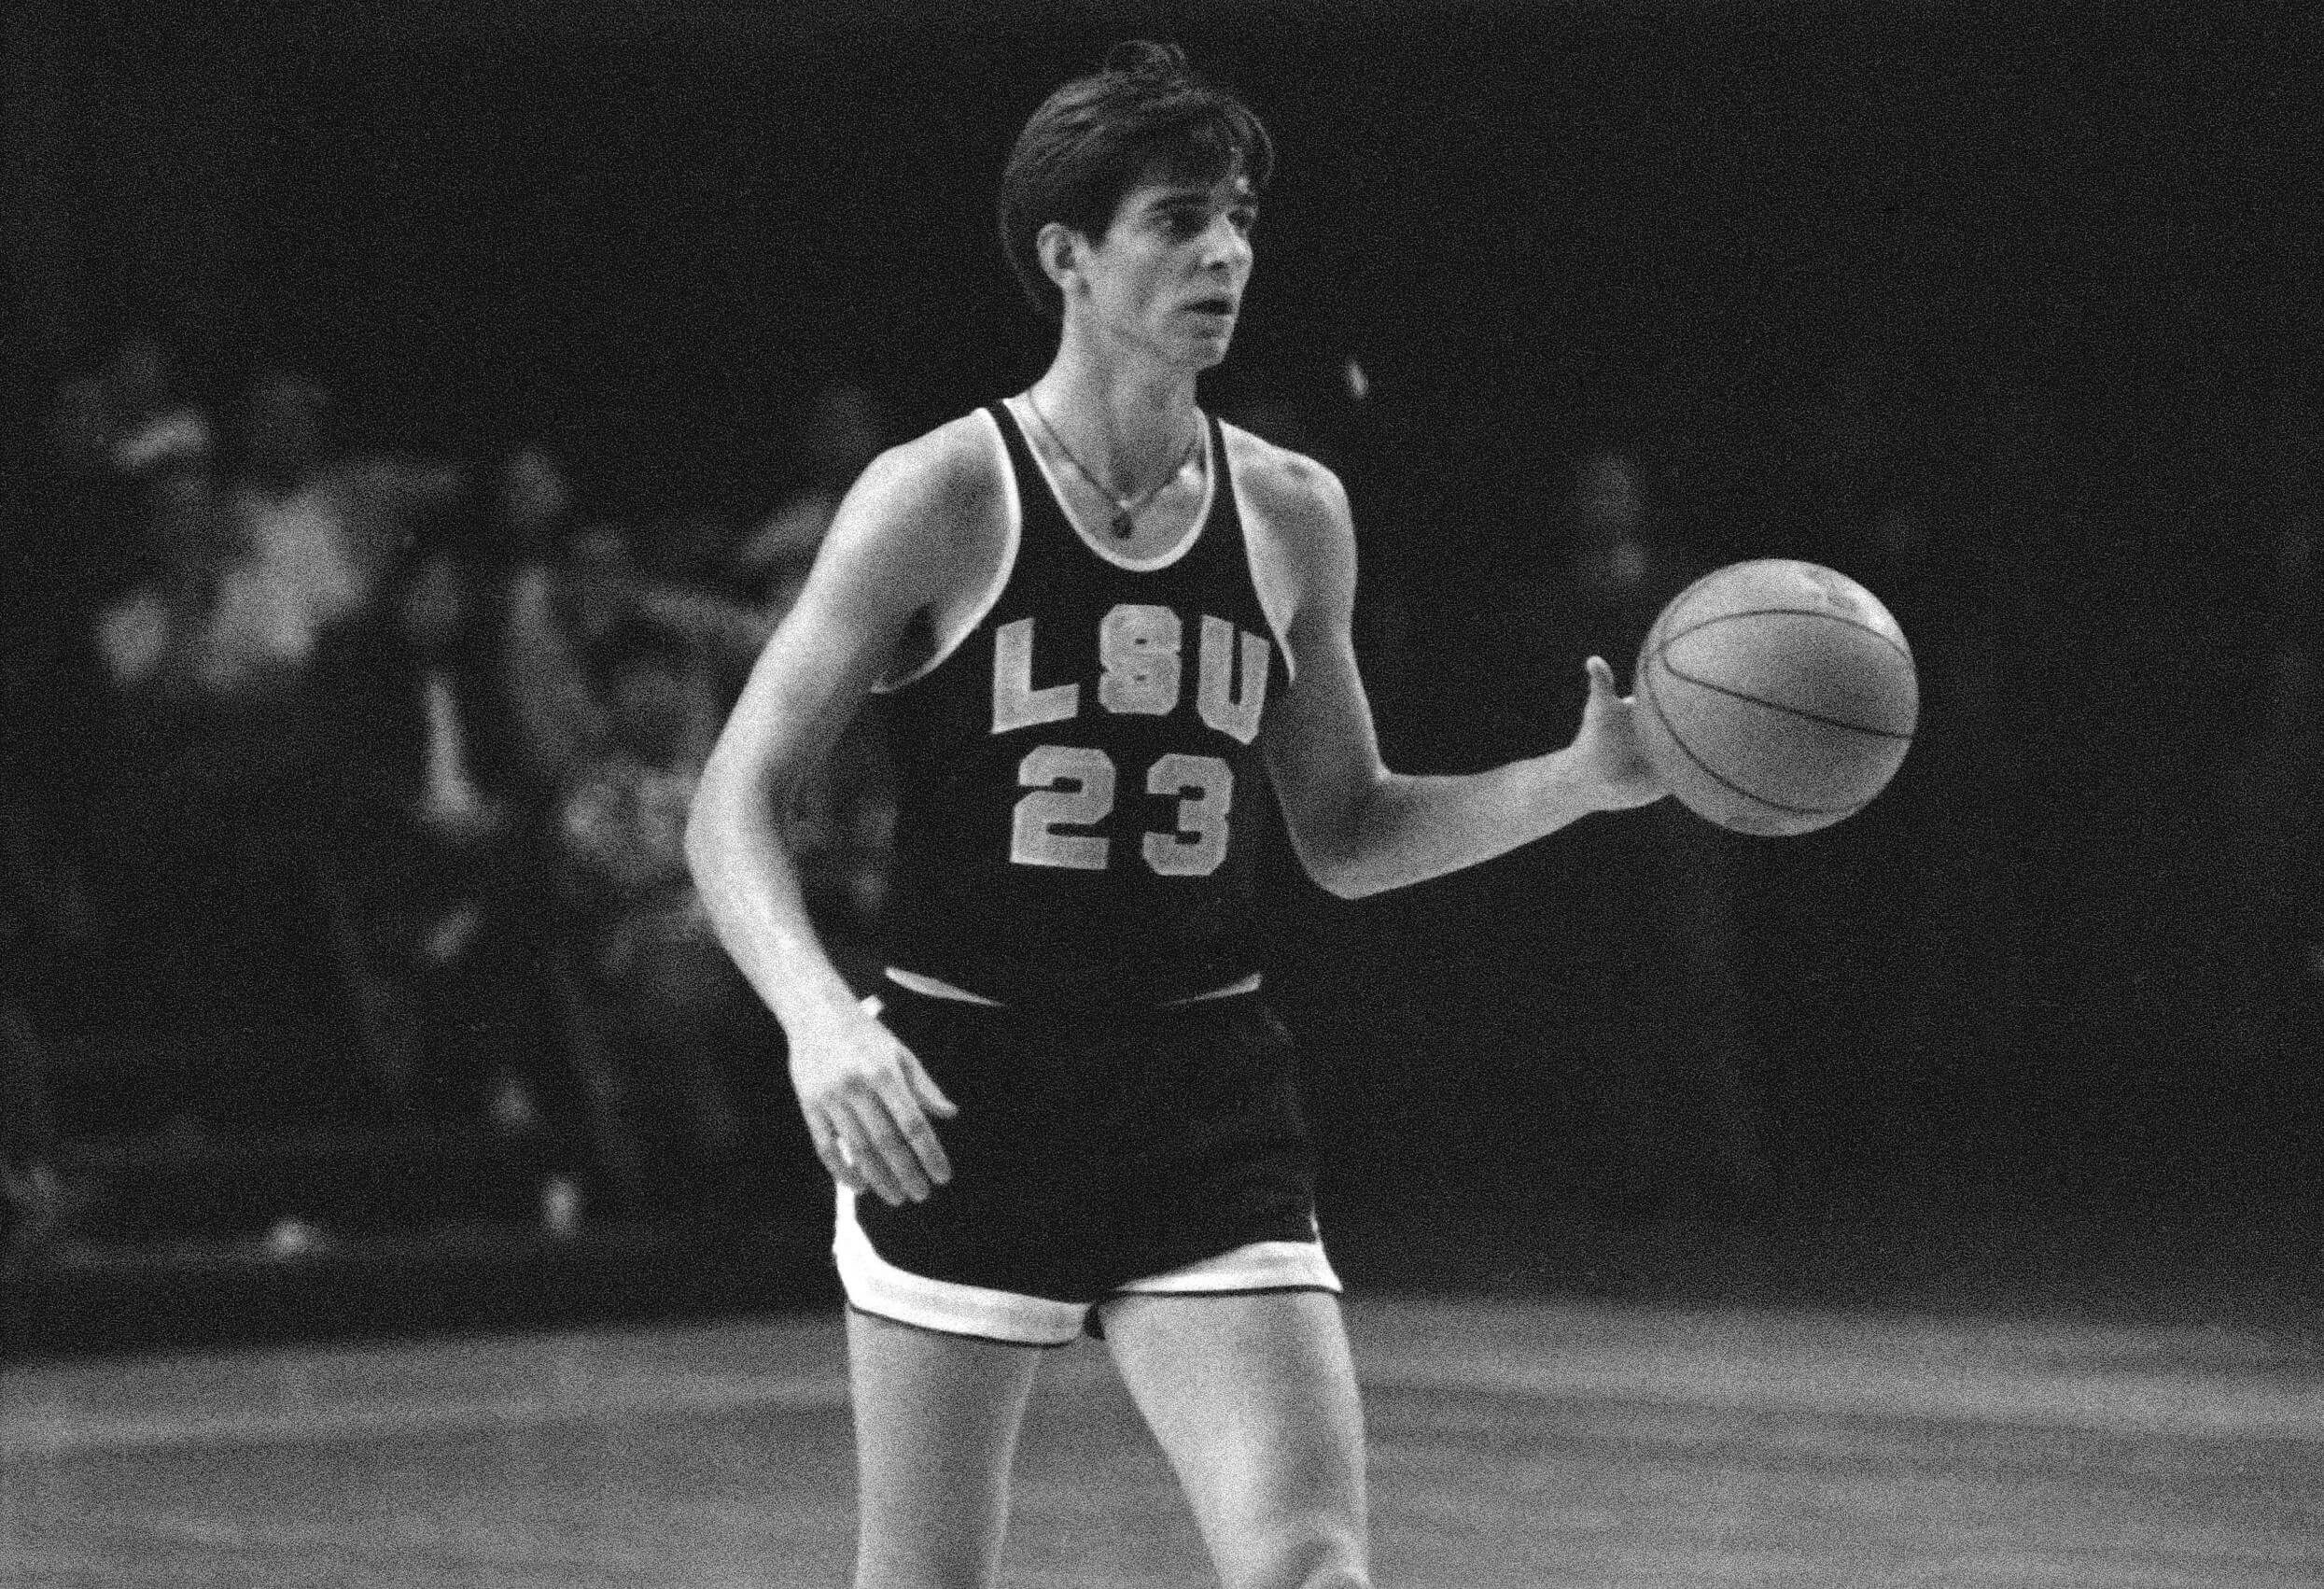 Jaeson Maravich, Son of Pete Maravich, ‘Sick to My Stomach’ Over How His Father’s Record Could be Broken